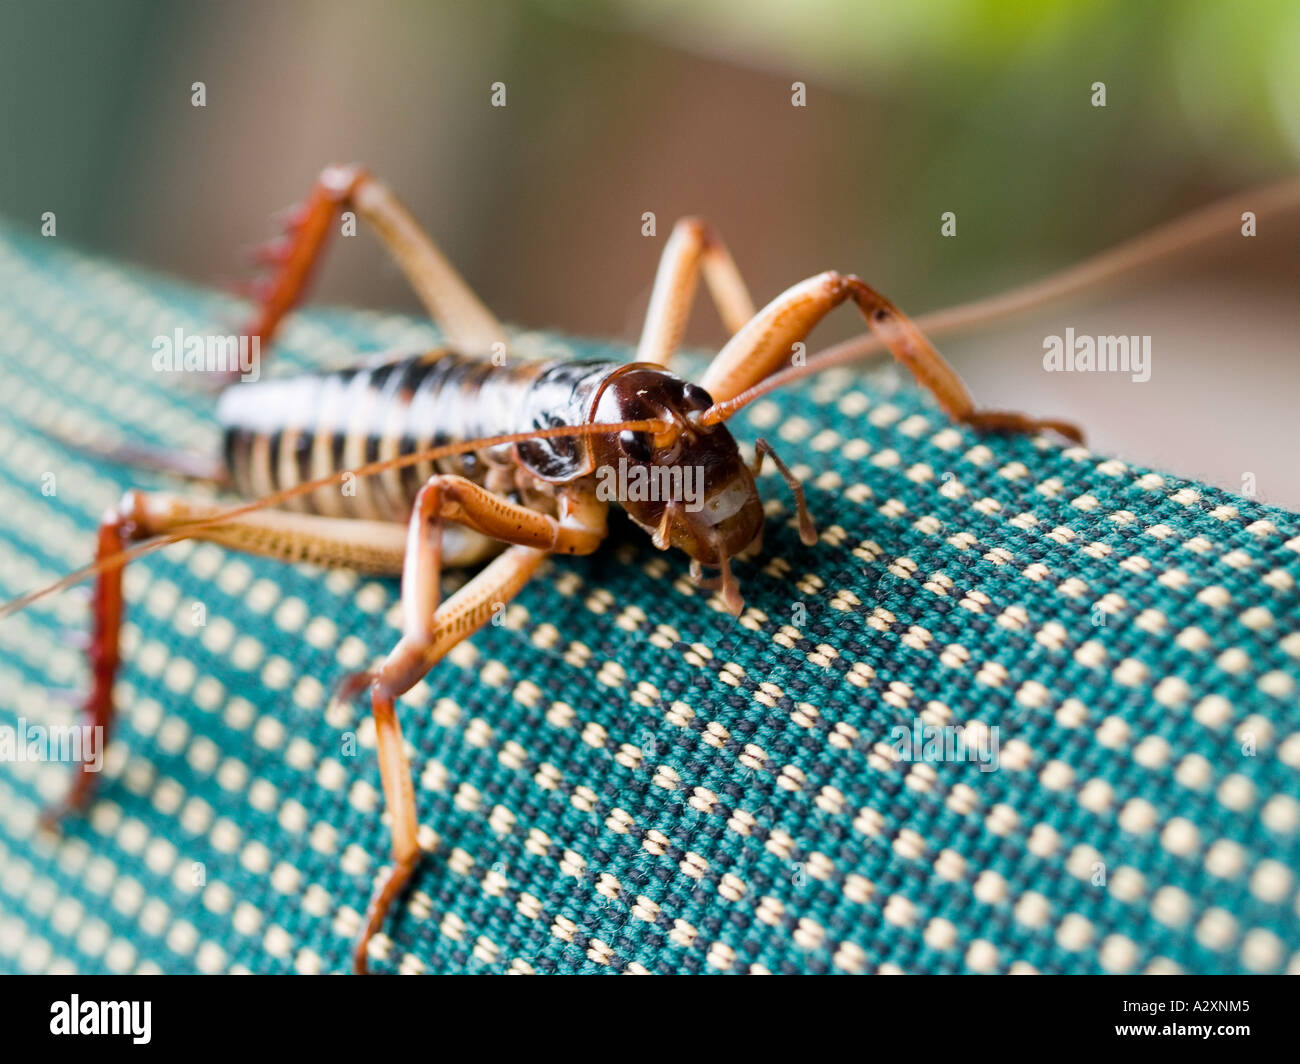 This weta an exotic insect related to grasshoppers crickets and locusts clings to a chair Stock Photo